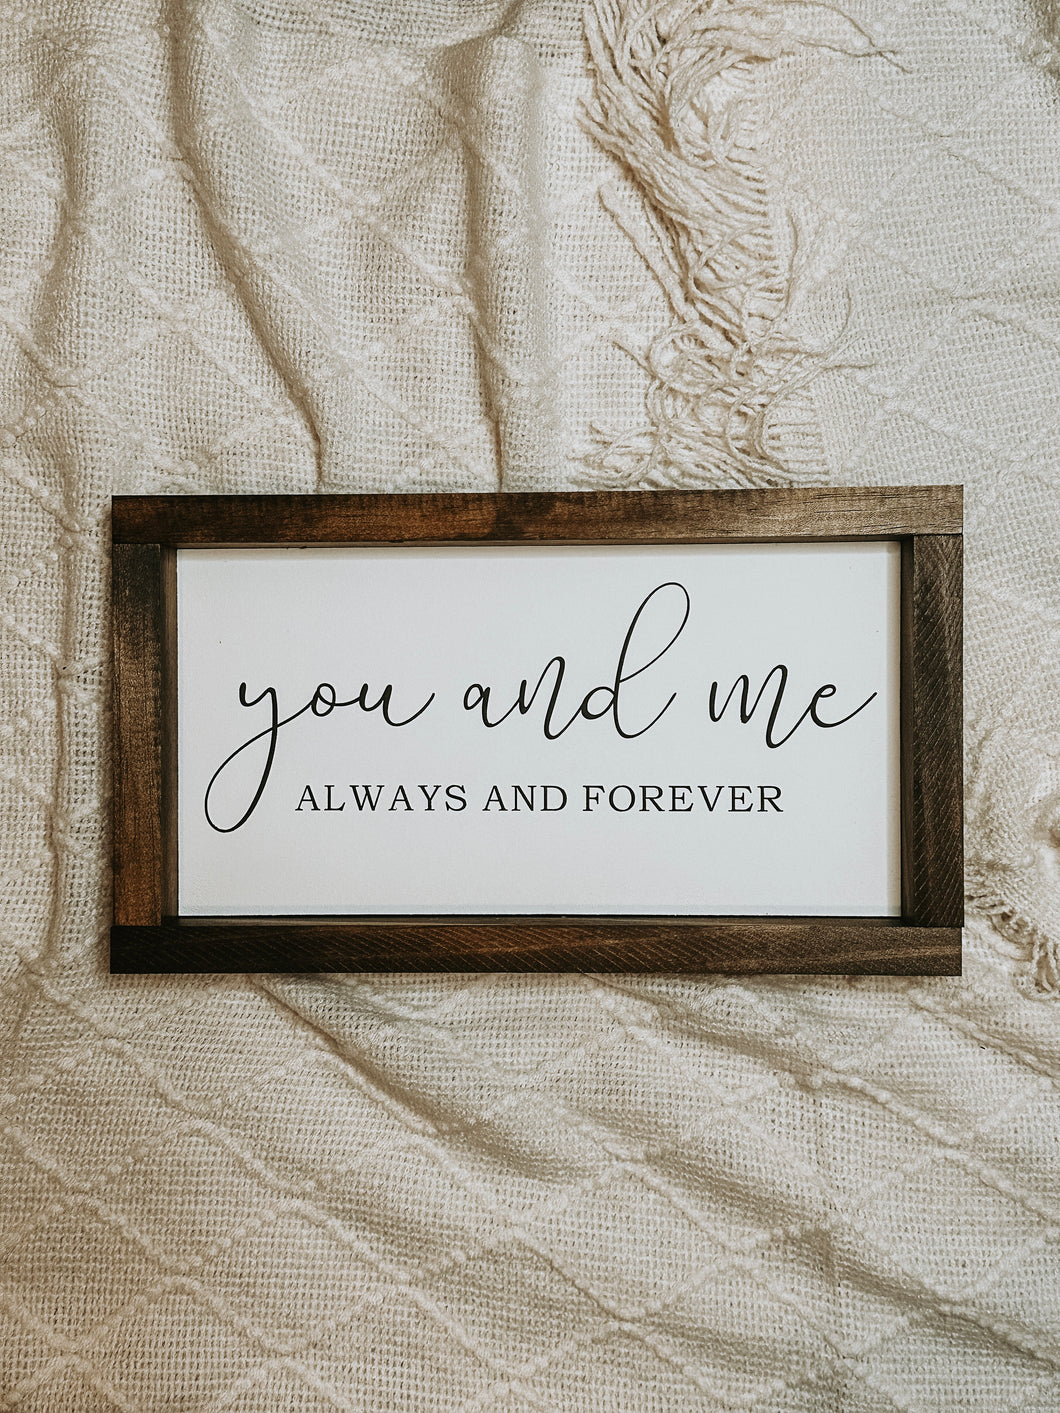 You and me - always and forever